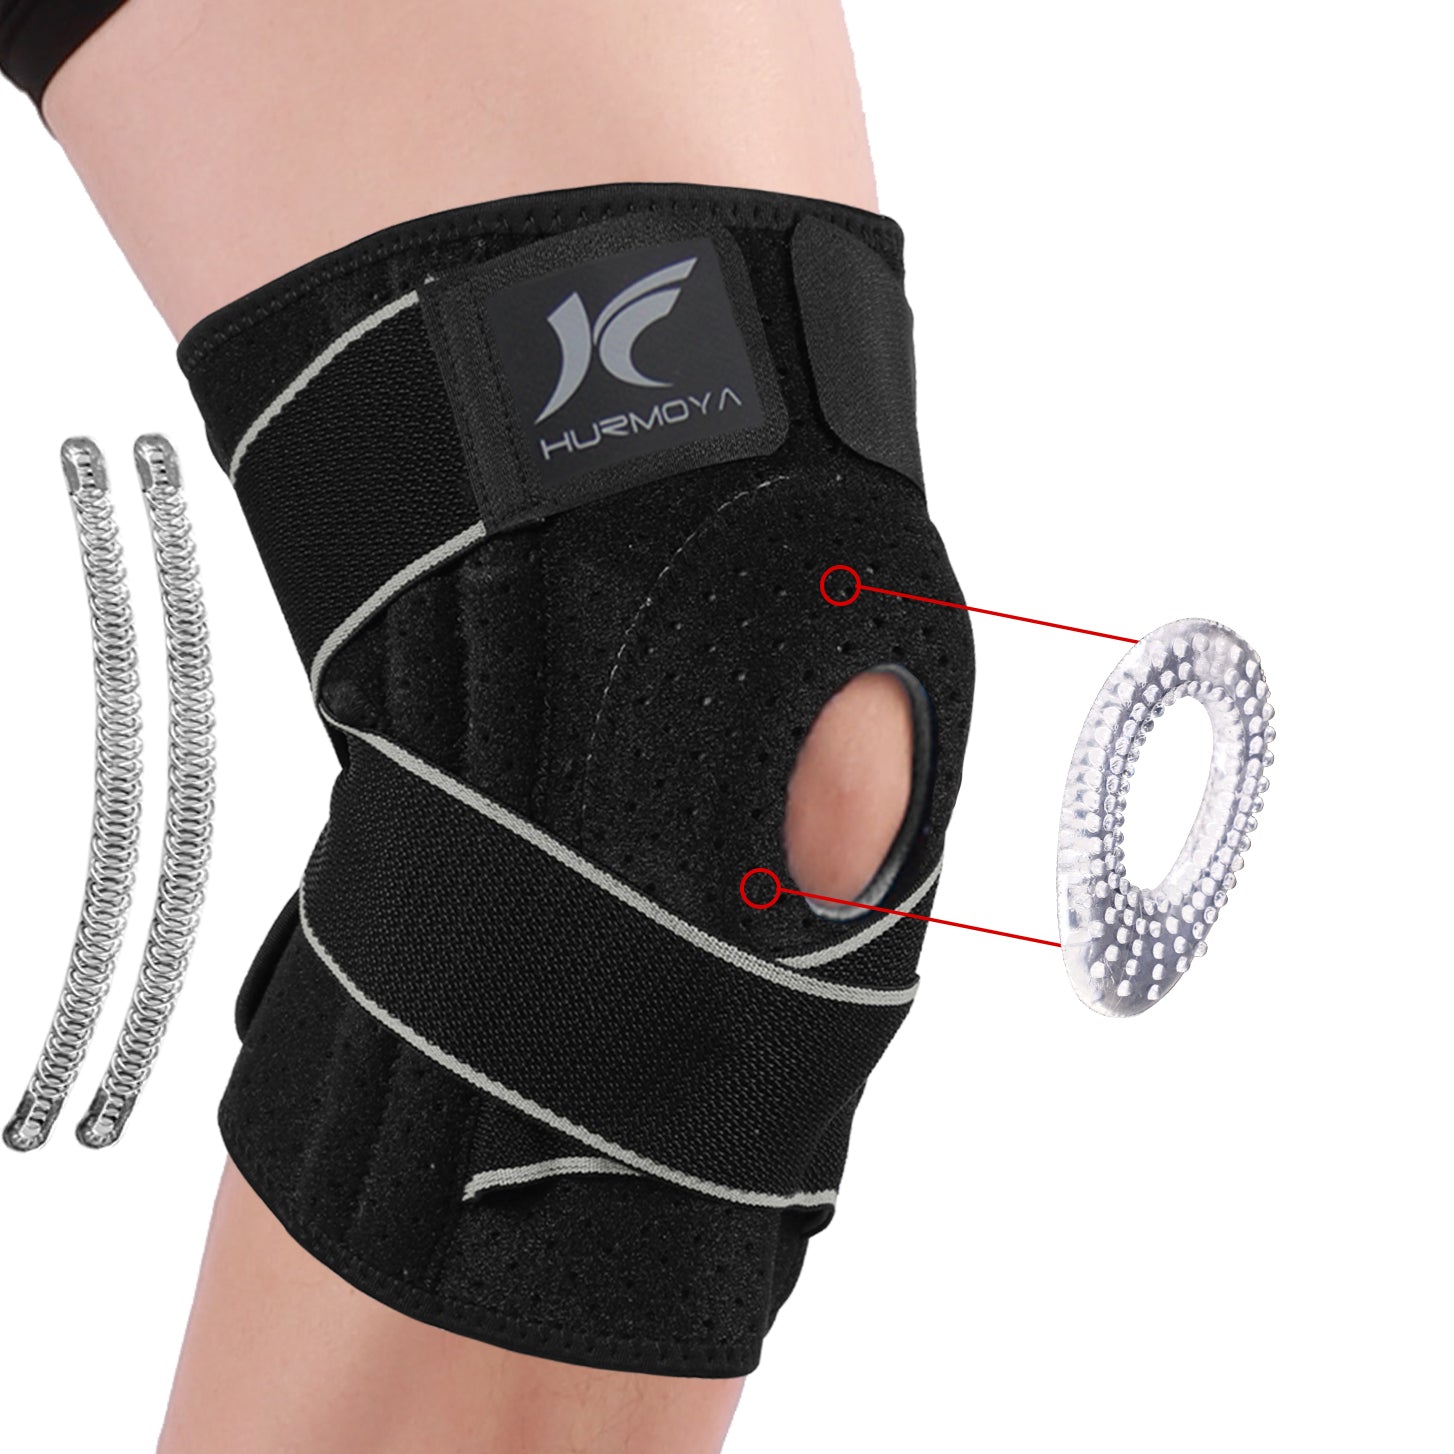 Knee Brace Compression Knee Sleeve - HOMPO Non-Slip Adjustable Knee Brace  Wraps with Pressure Strap Best Support,Suit for Running, Cycling, Tennis